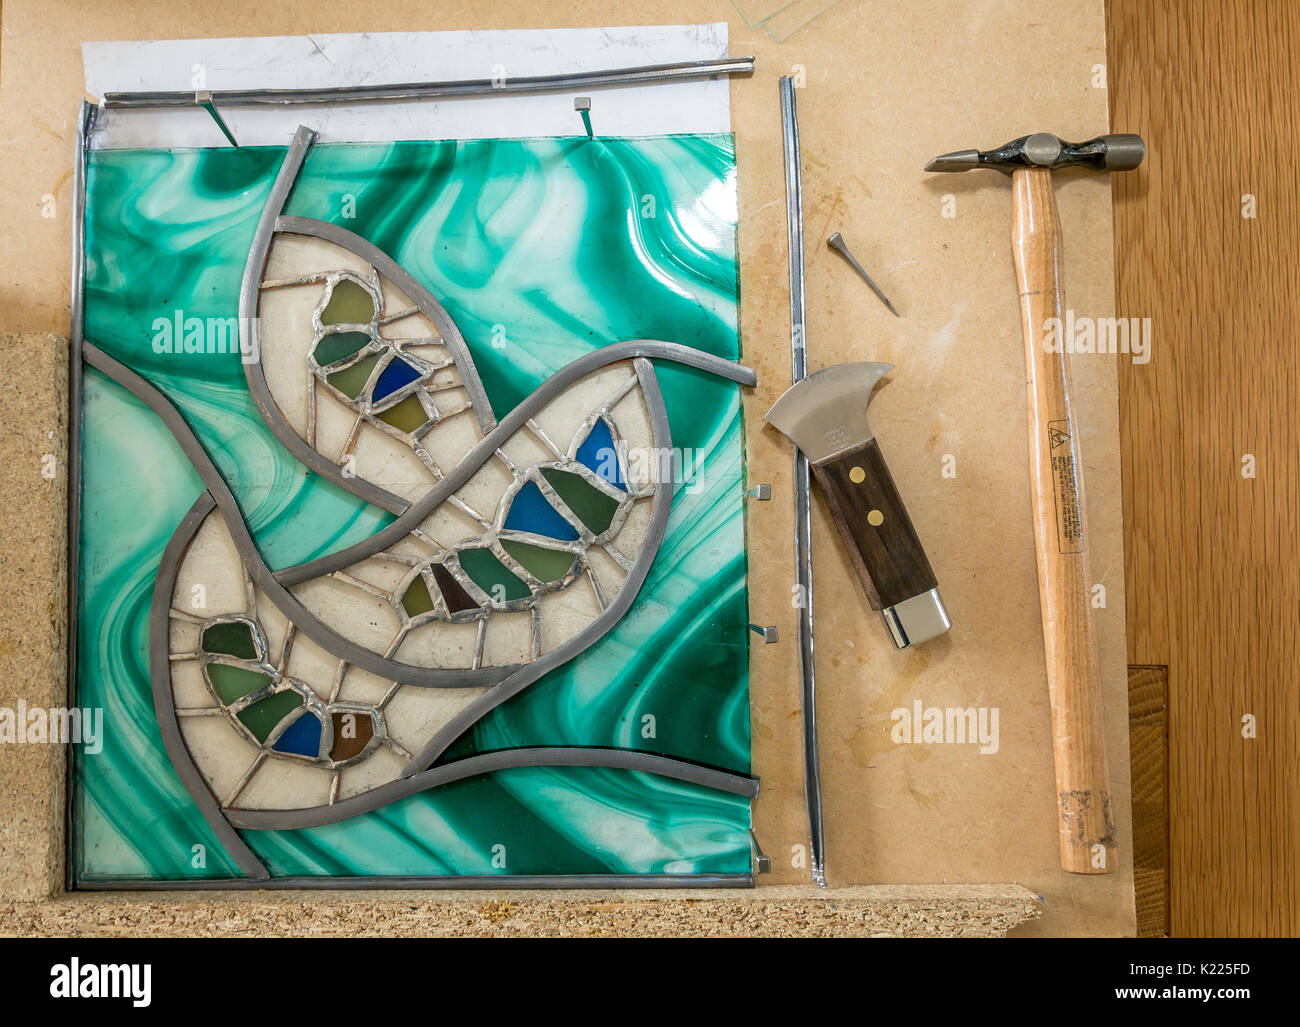 Work in progress making stained glass and sea glass art work